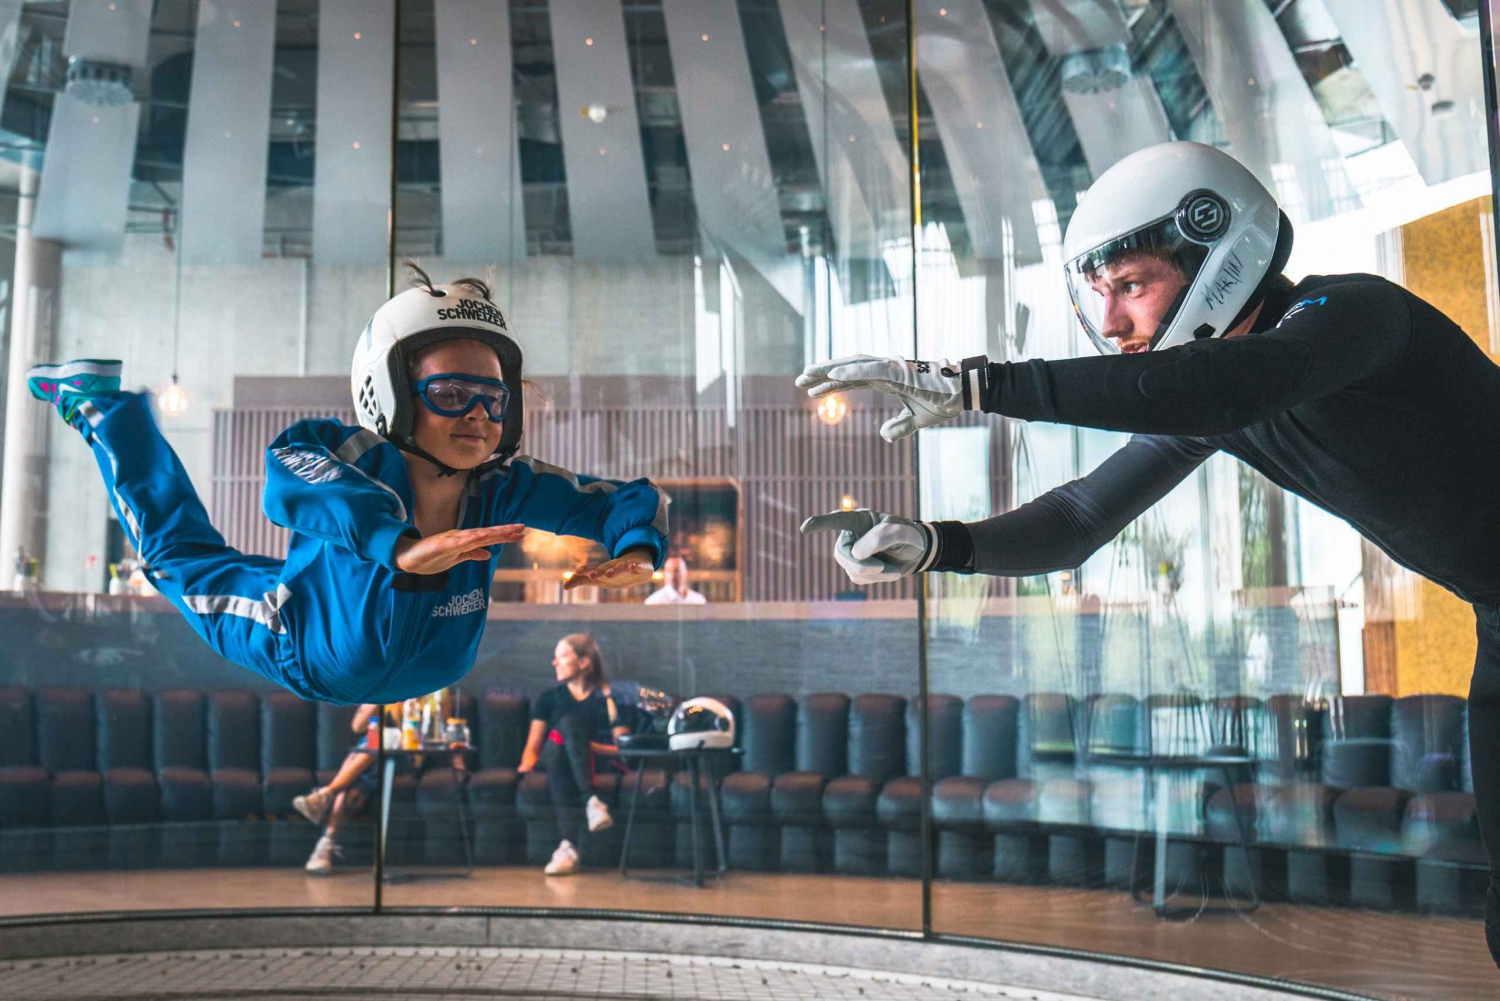 Bodyflying: Indoor Skydiving Experience for 2 People